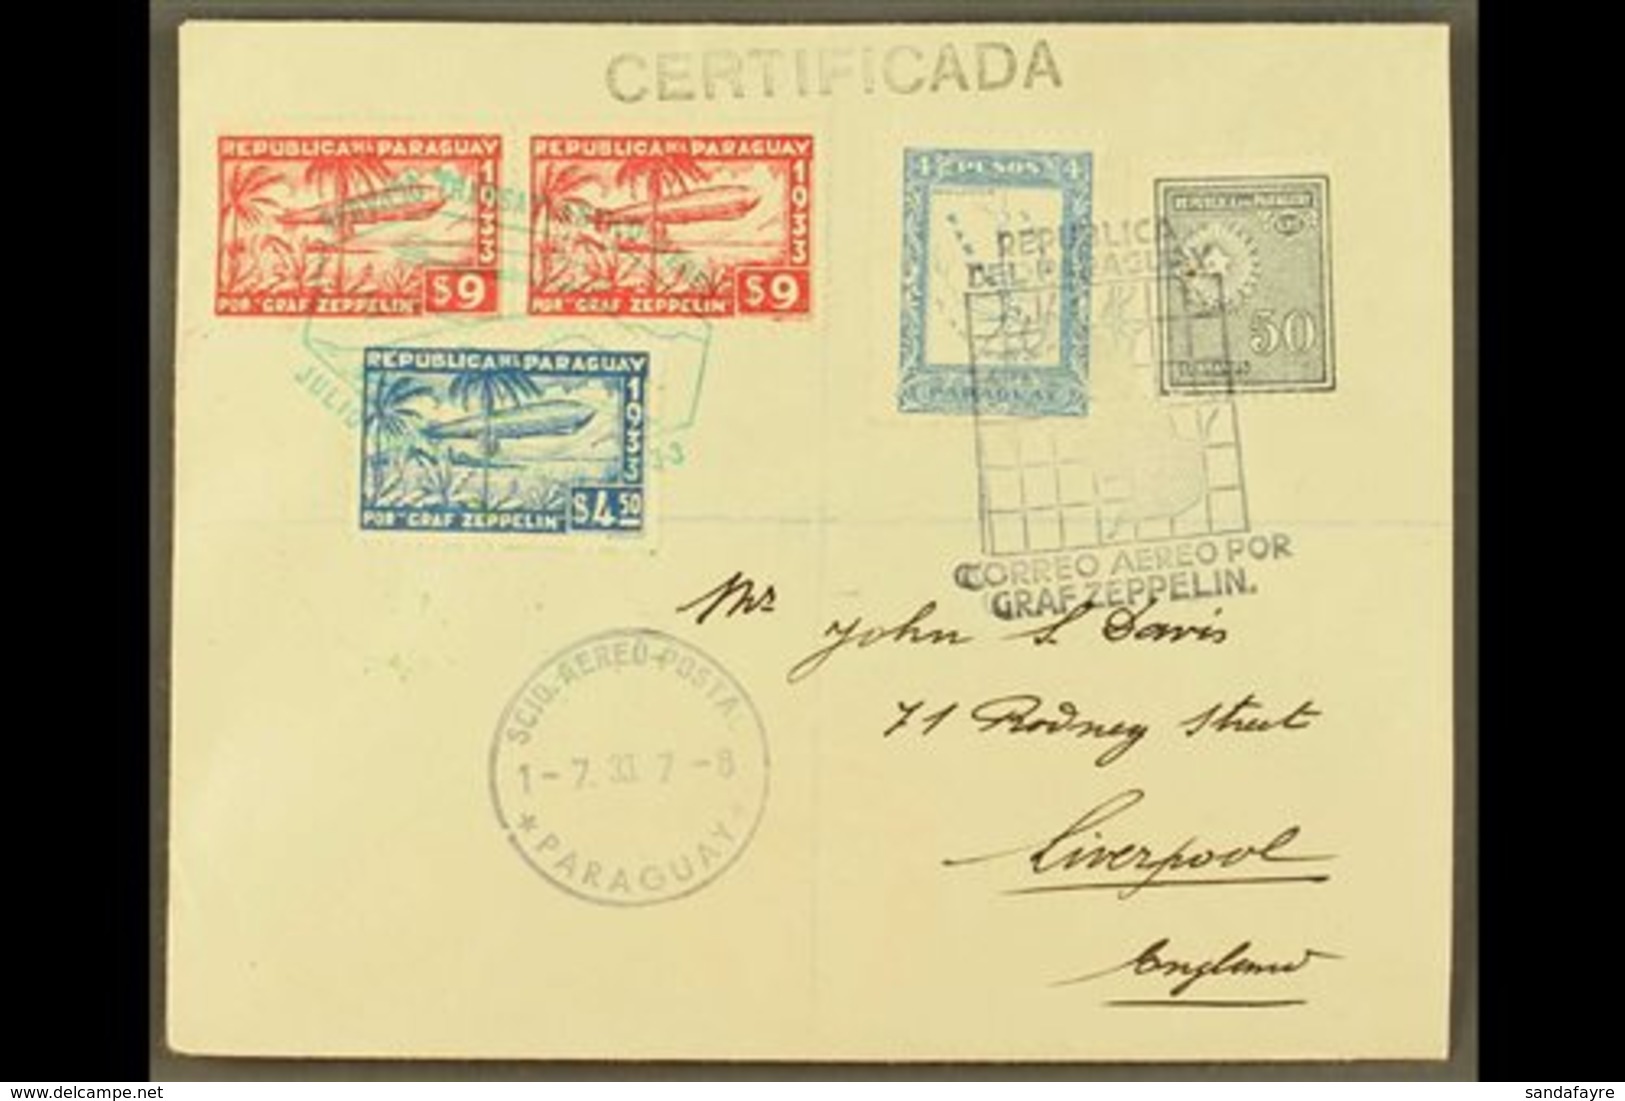 1933 Registered Cover To England Franked Paraguay Postage 4p And 50c Cancelled Map Type Graf Zeppelin Cancel With $4.50  - Paraguay